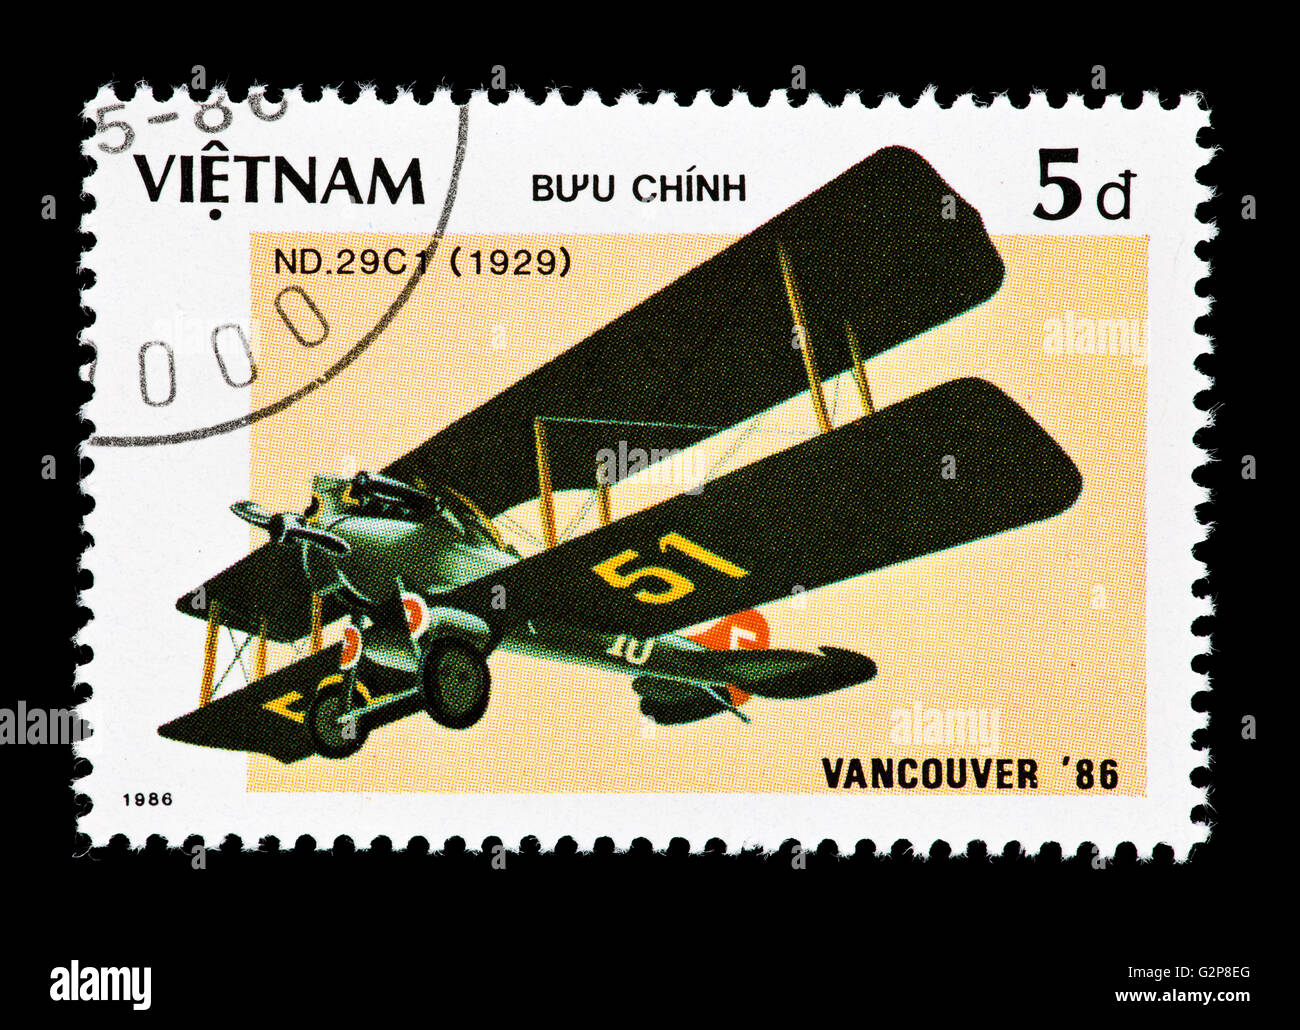 Postage stamp from Vietnam depicting a Nieuport-Delage NiD-29C1 Stock Photo